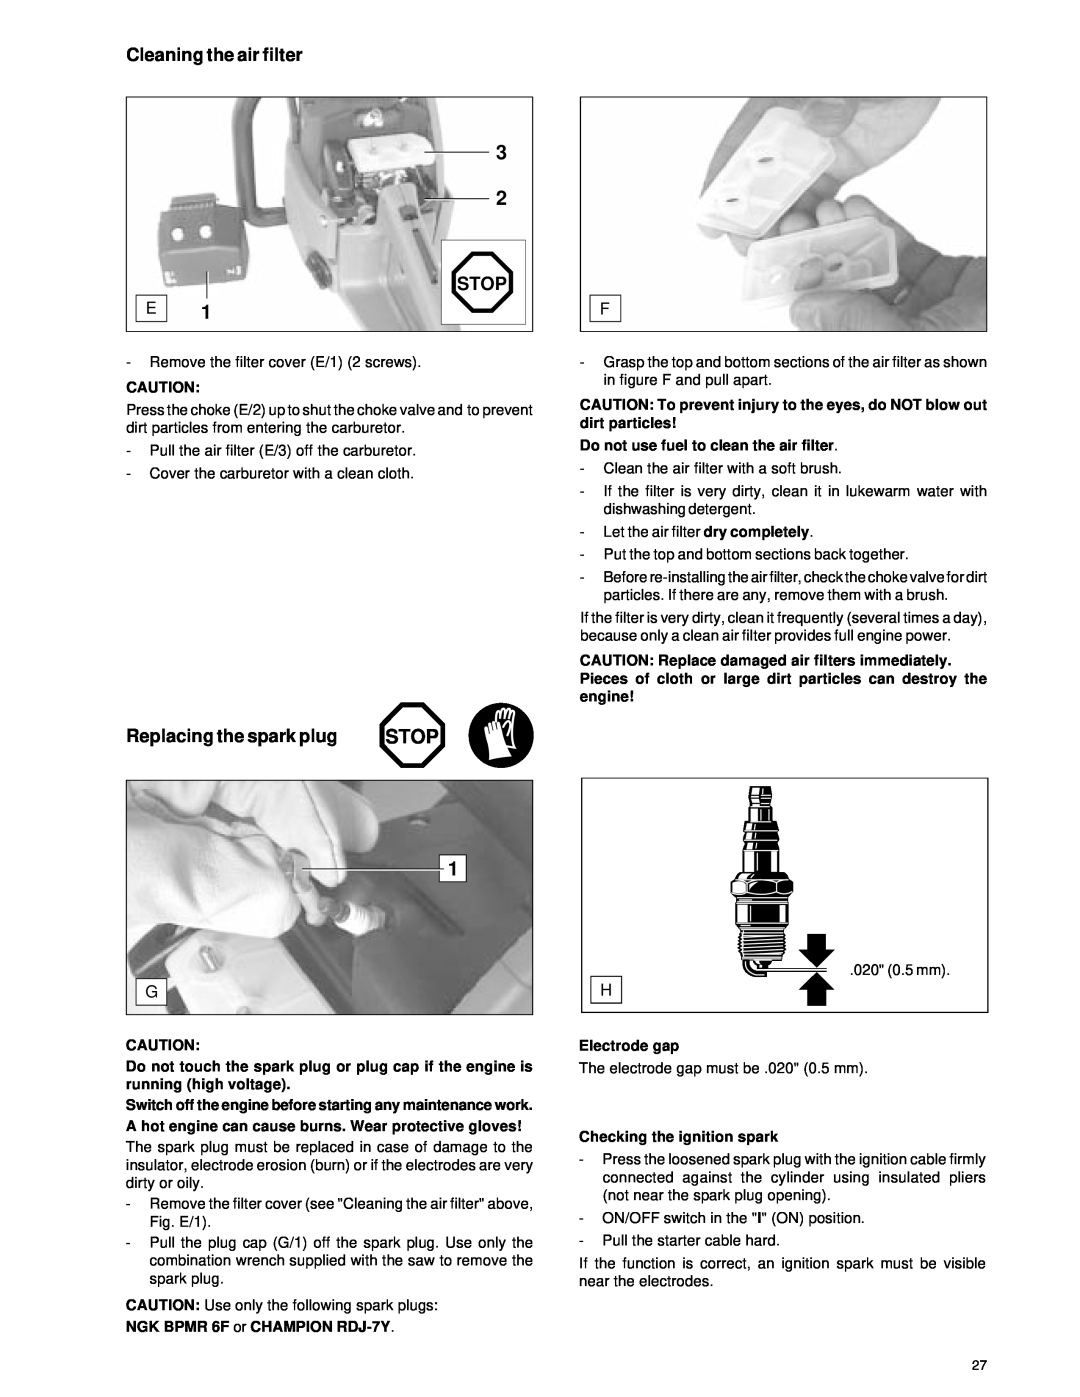 Makita Chain Saw Cleaning the air filter, Stop, Replacing the spark plug, NGK BPMR 6F or CHAMPION RDJ-7Y, Electrode gap 